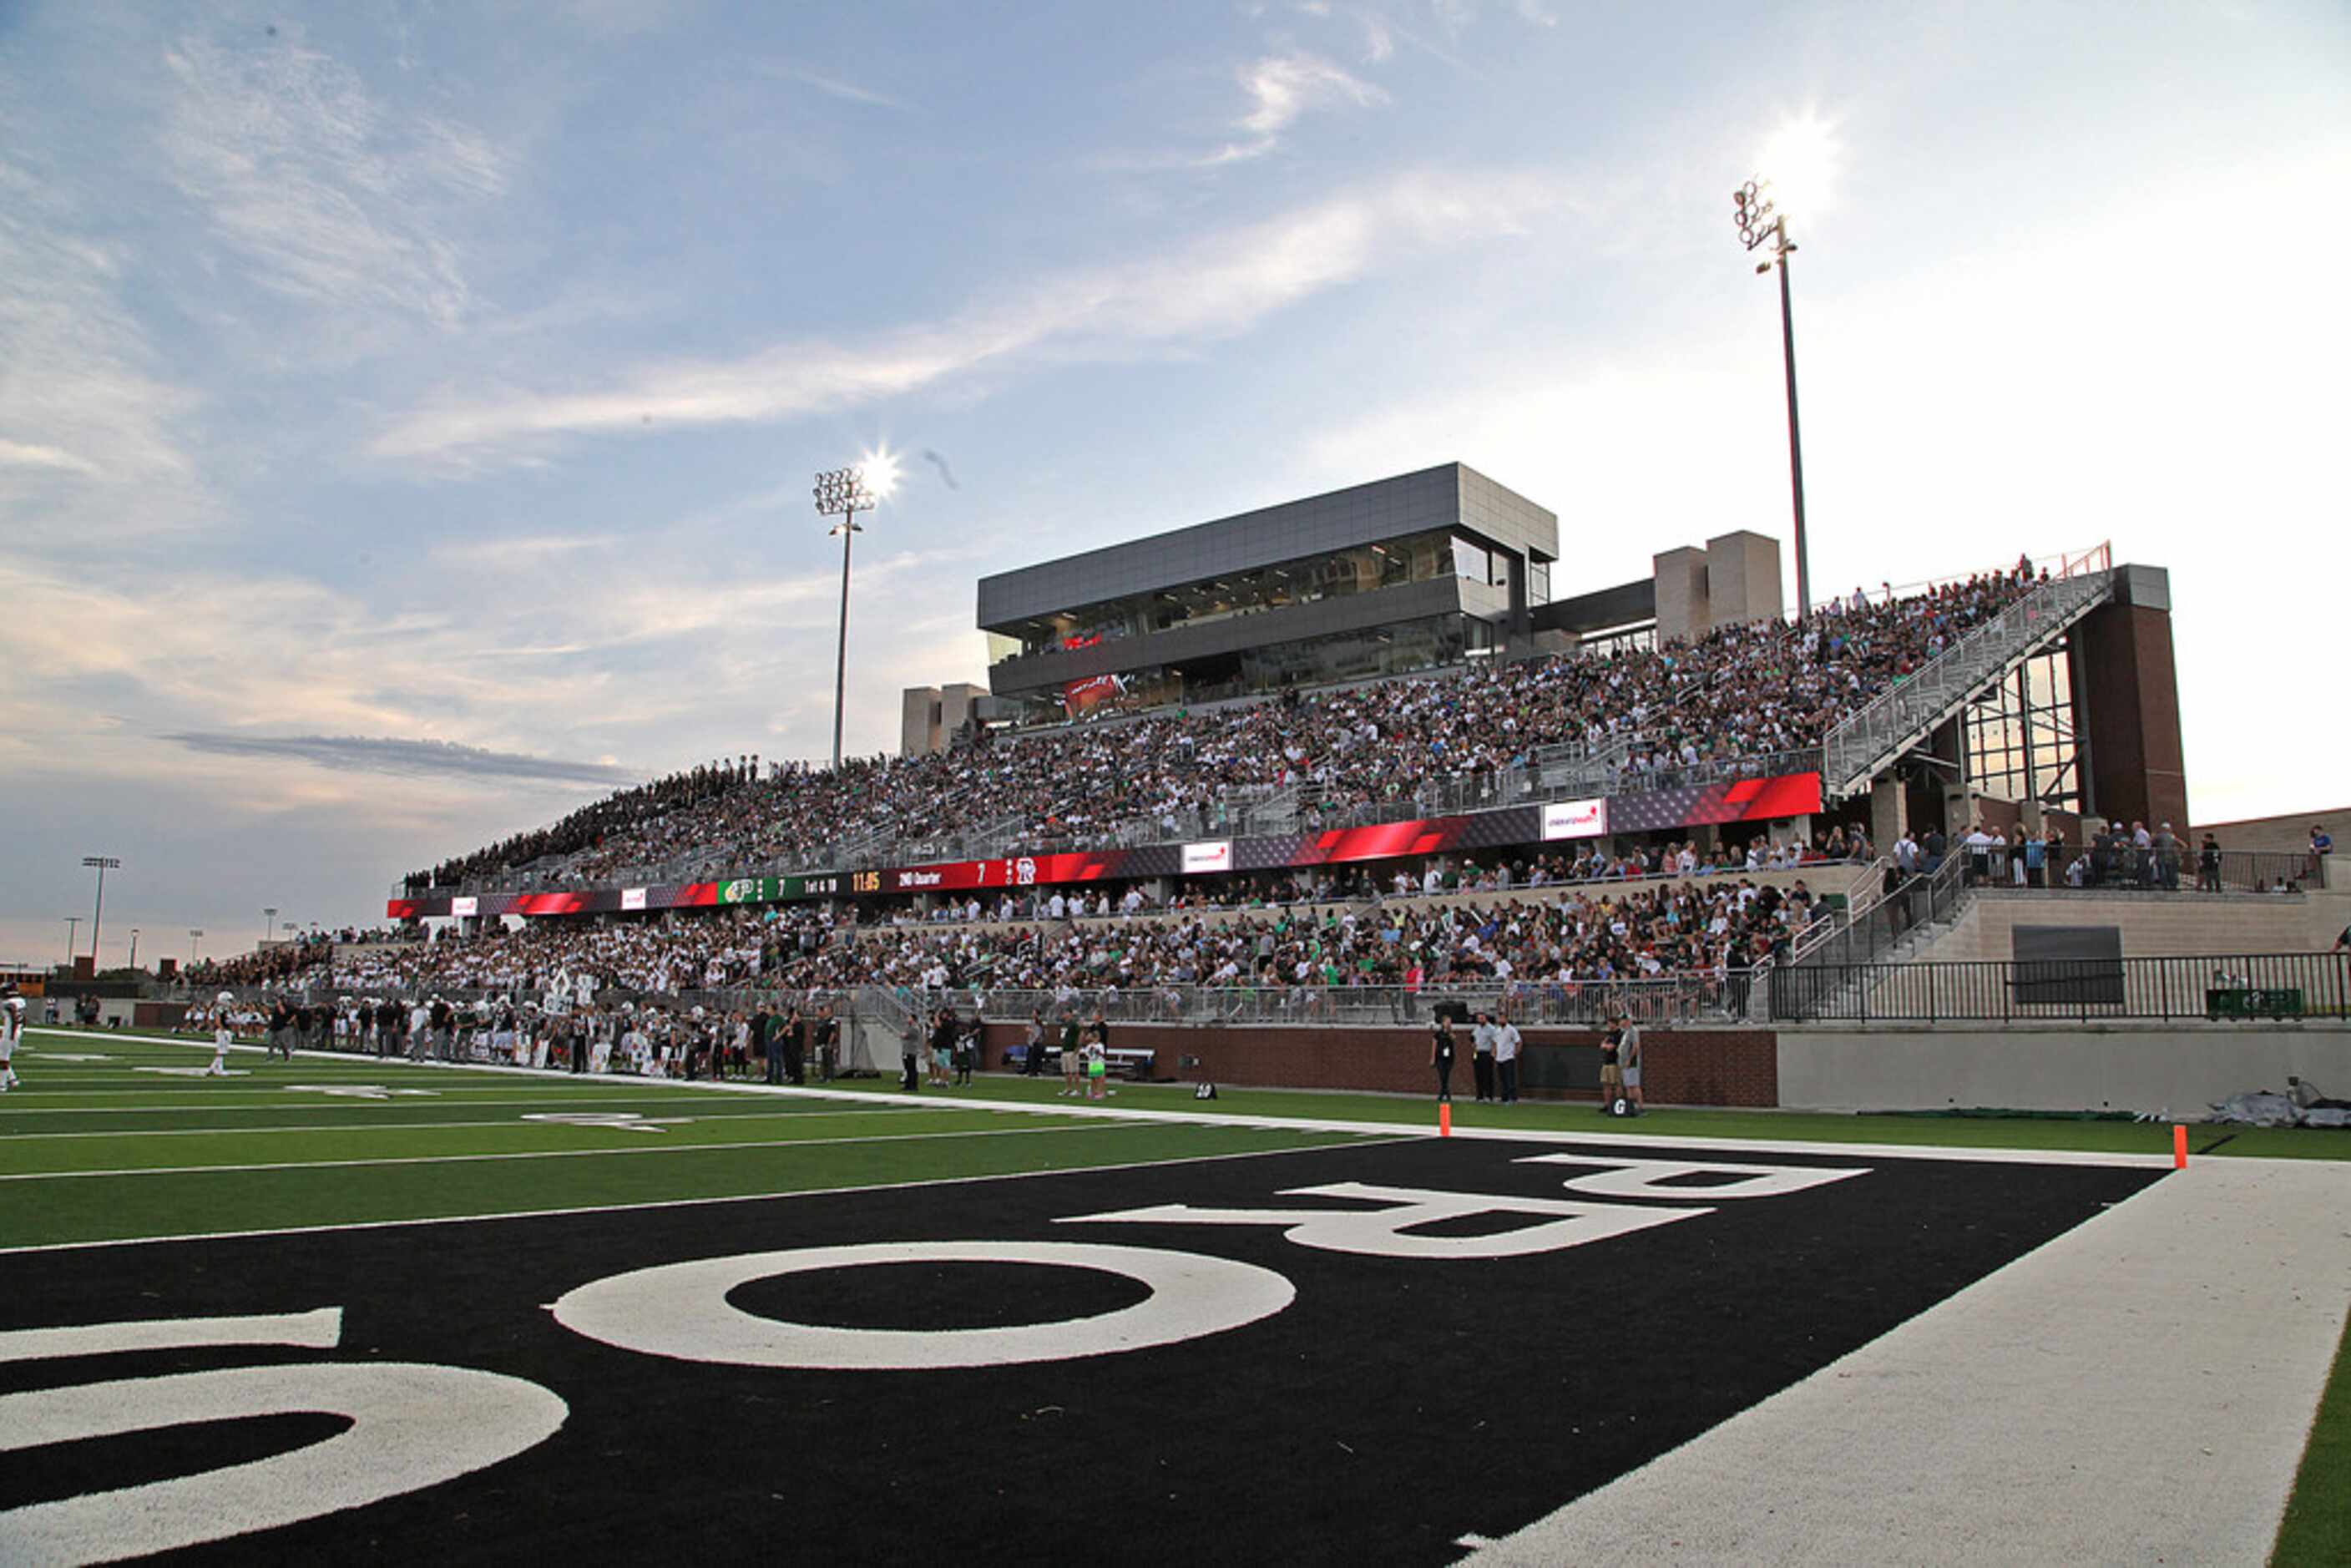 Fans filled the stands on the home side for the first game the in the new stadium as Prosper...